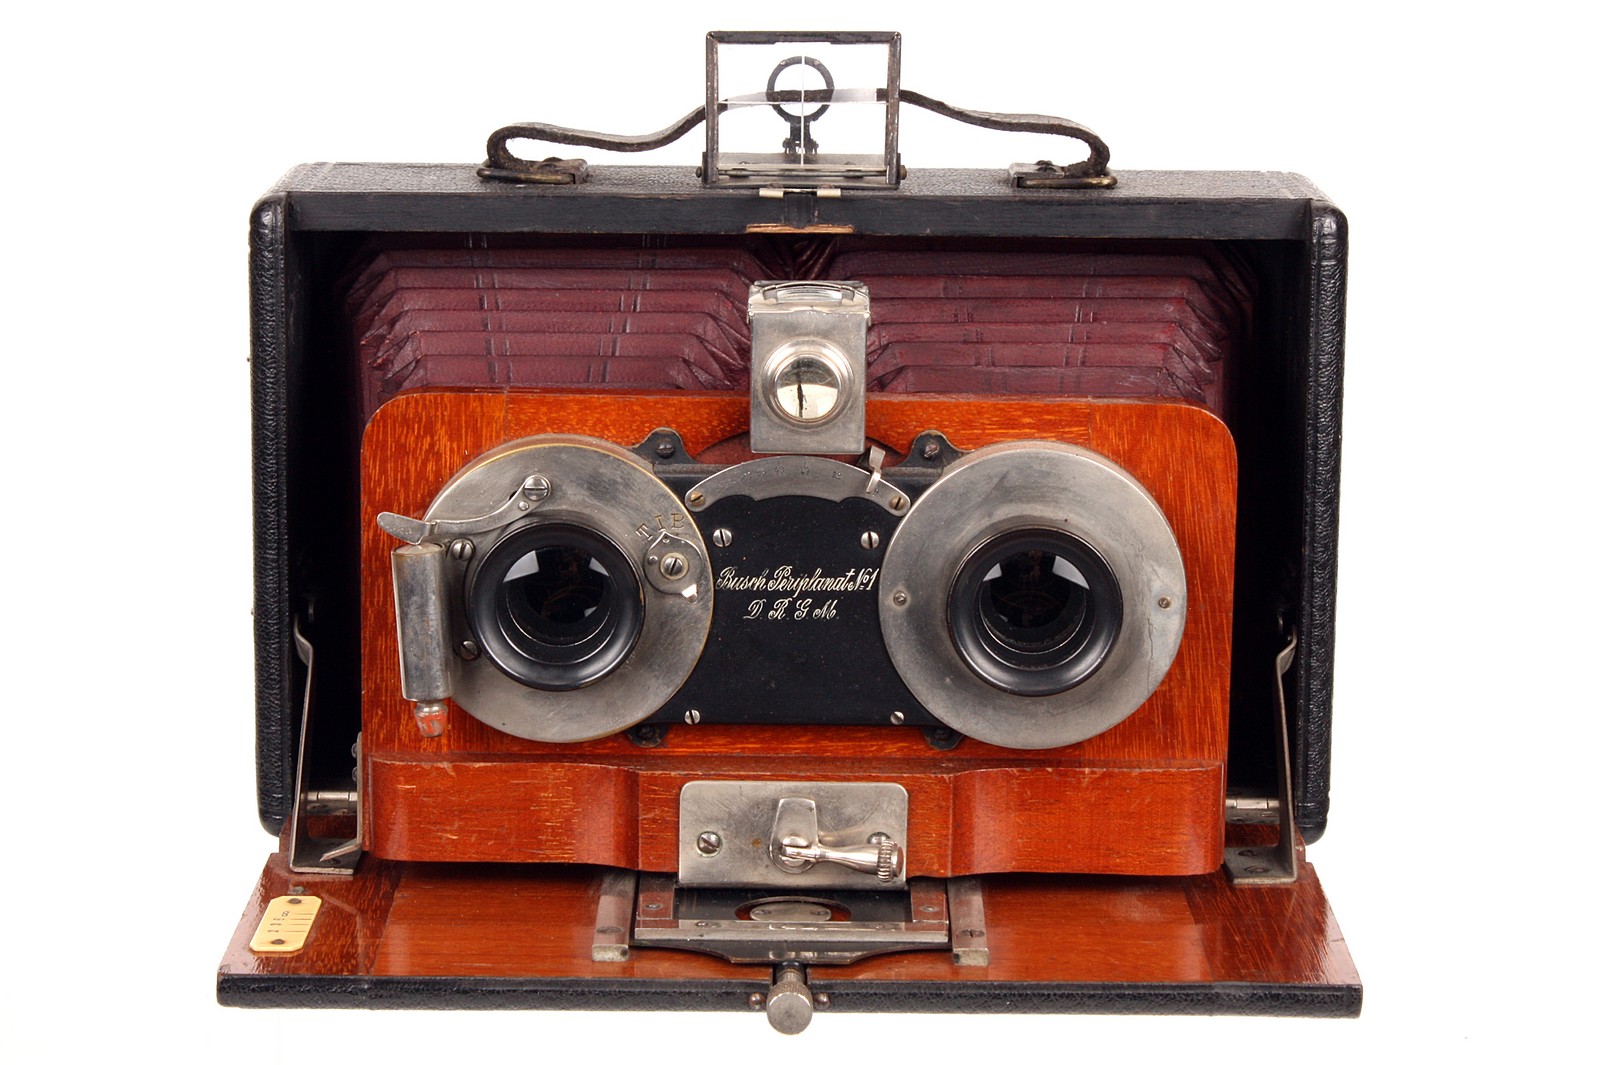 A Busch Stereo Camera, with Busch Perplanat No.1 f/9 lenses, body, VG, shutter not working, - Image 2 of 3